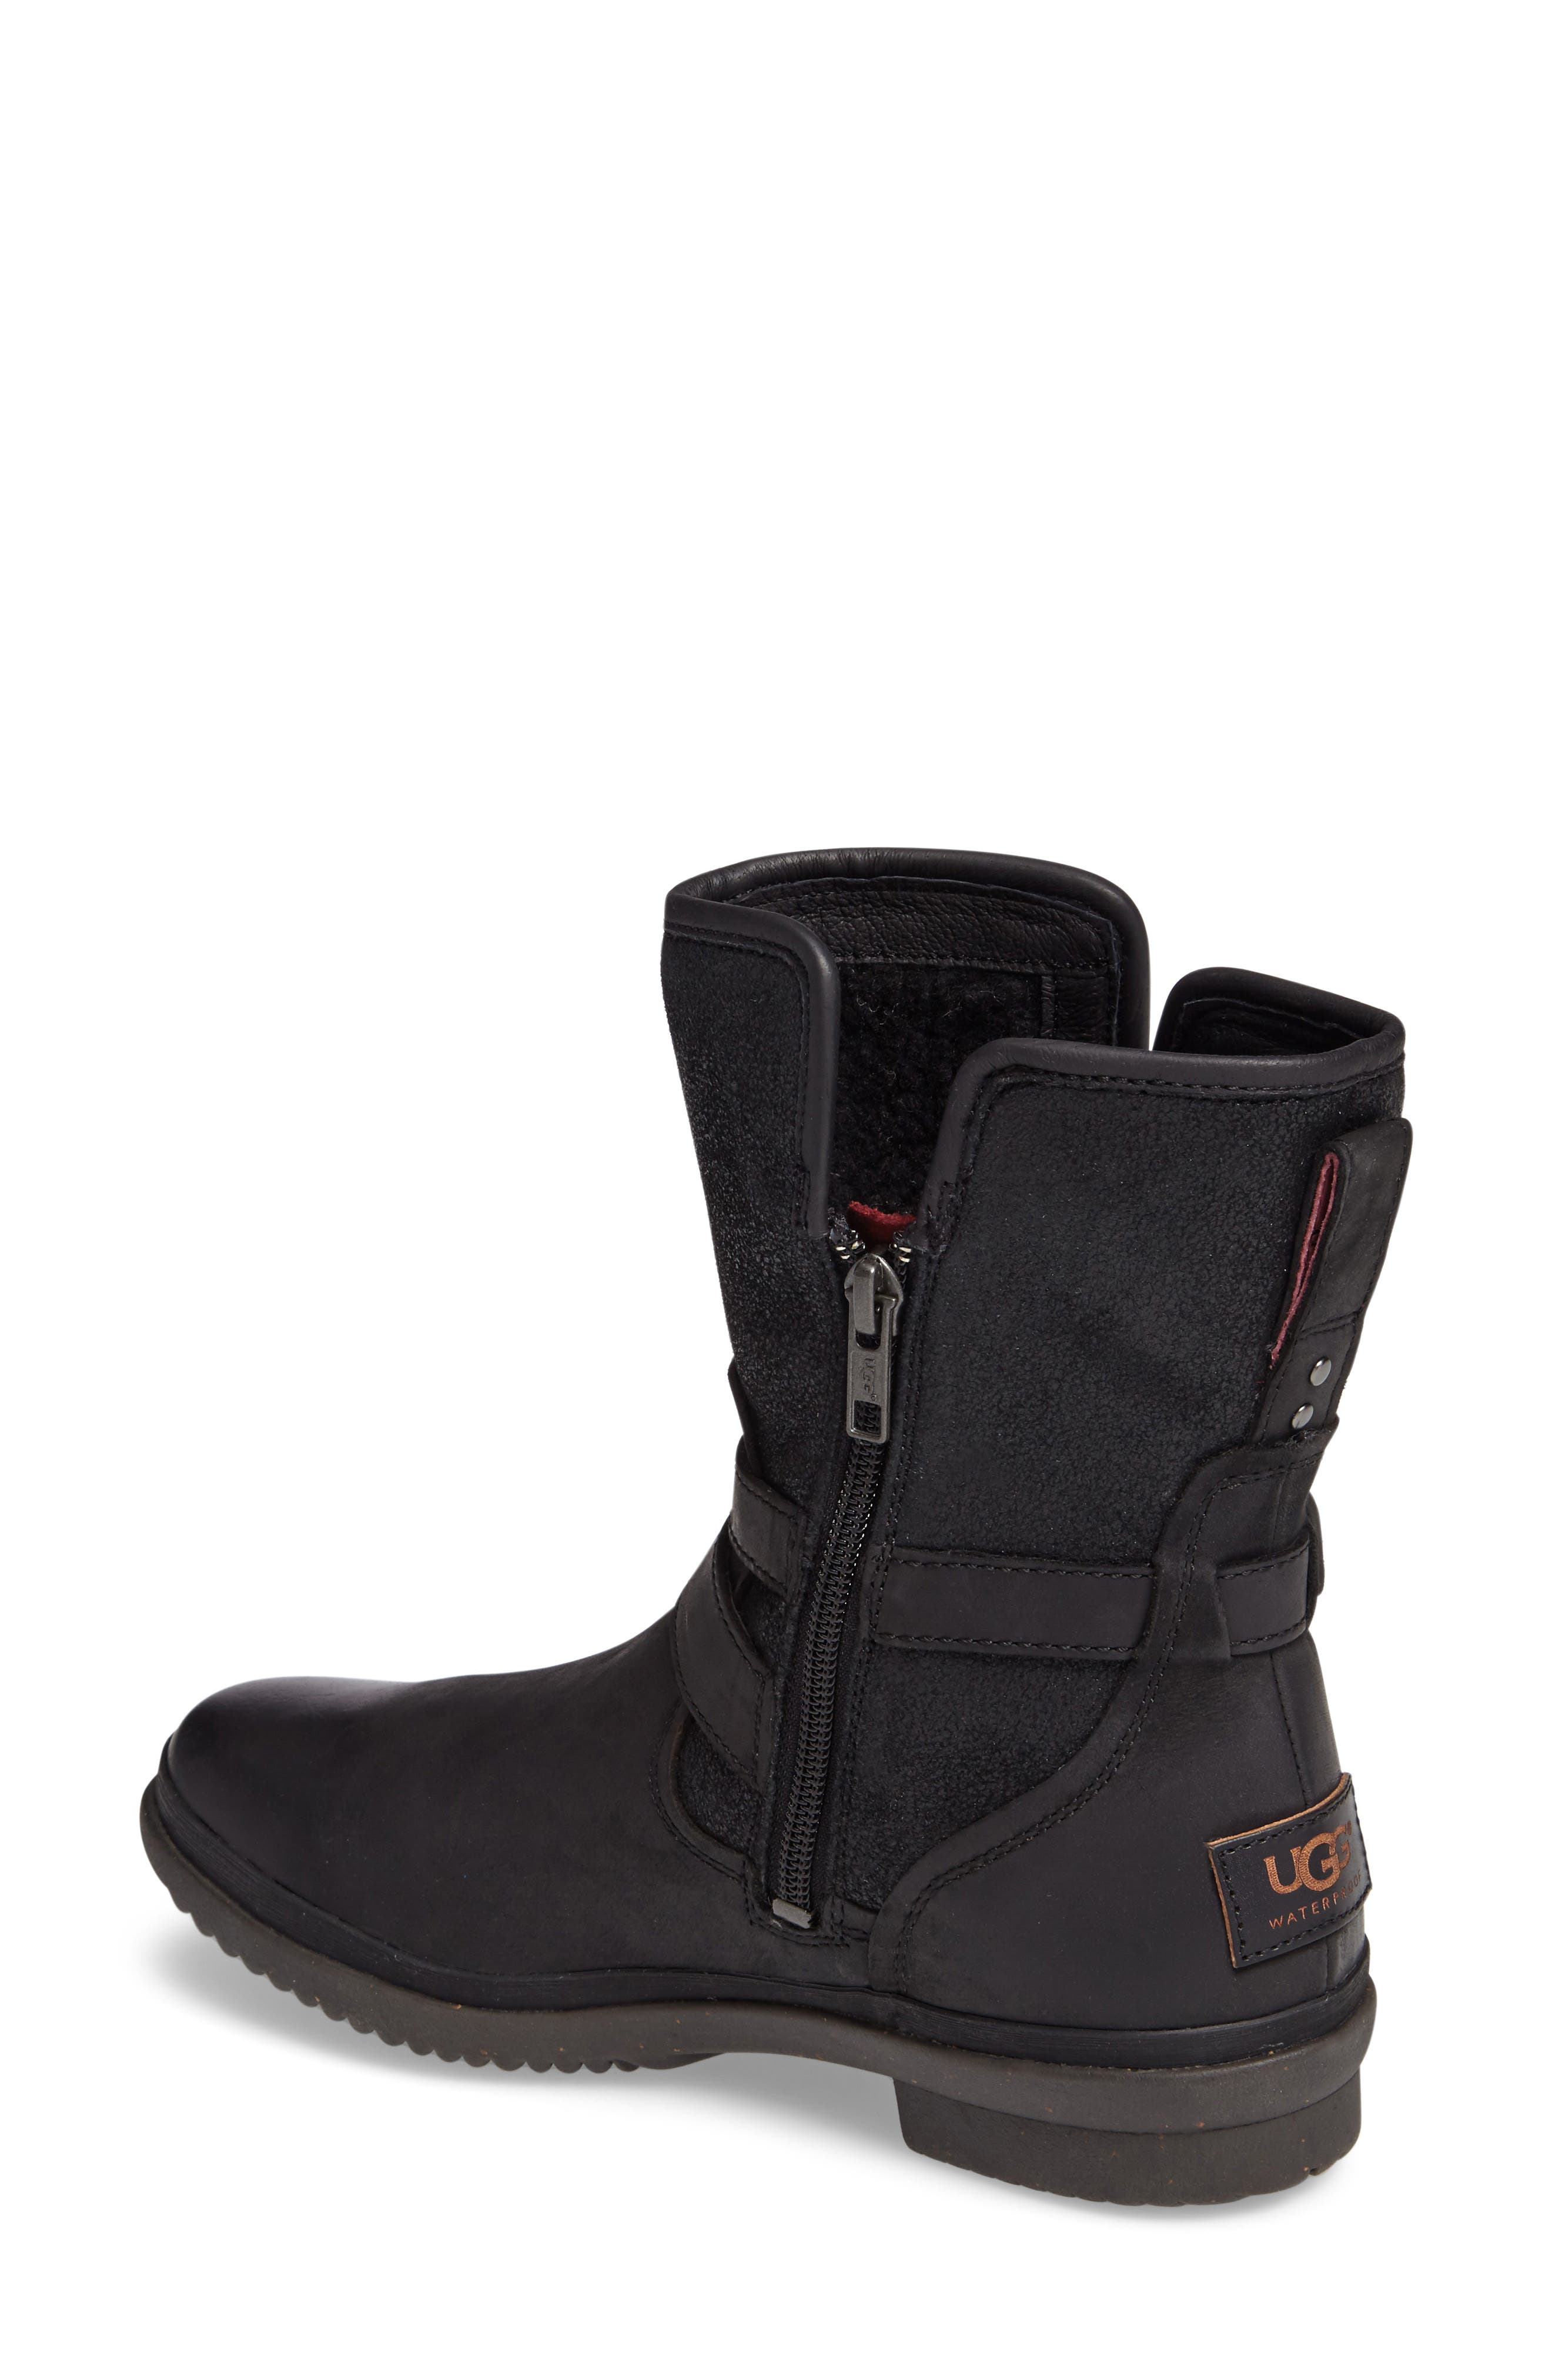 ugg simmens waterproof leather boot